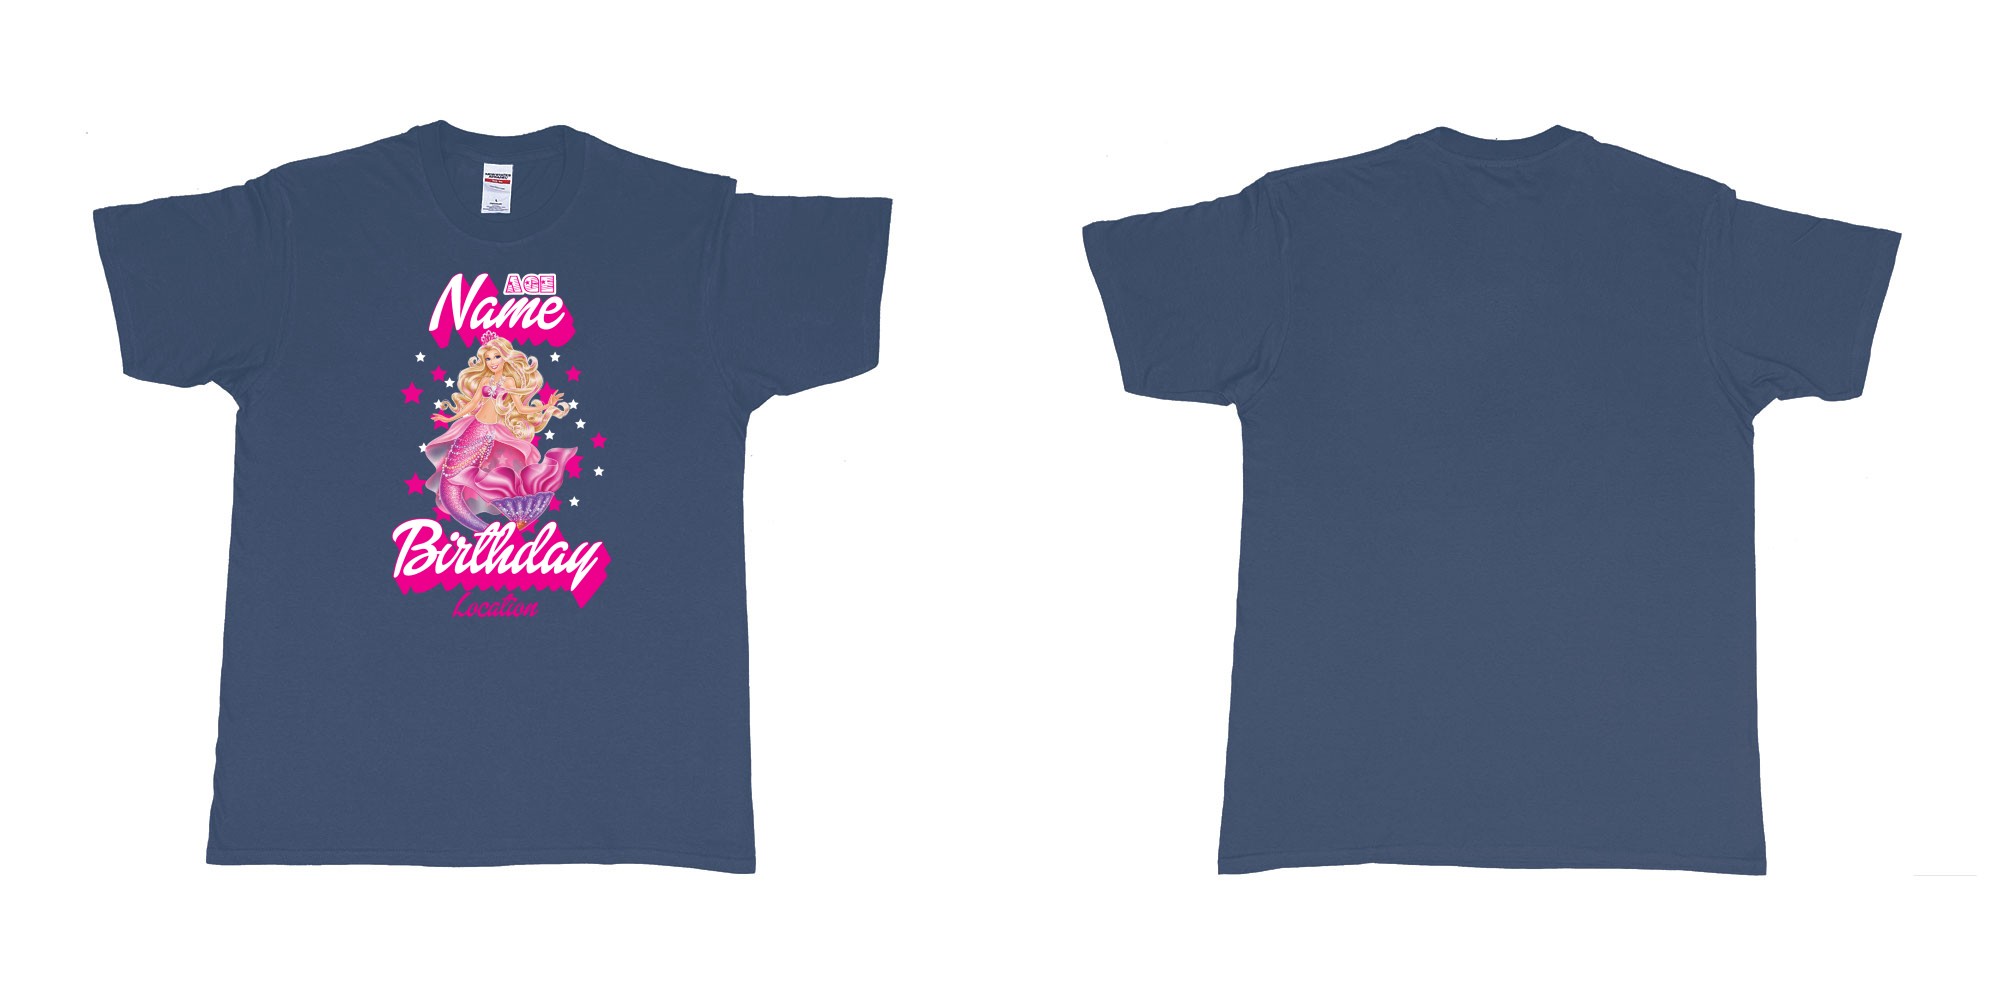 Custom tshirt design barbie mermaid custom name birthday in fabric color navy choice your own text made in Bali by The Pirate Way